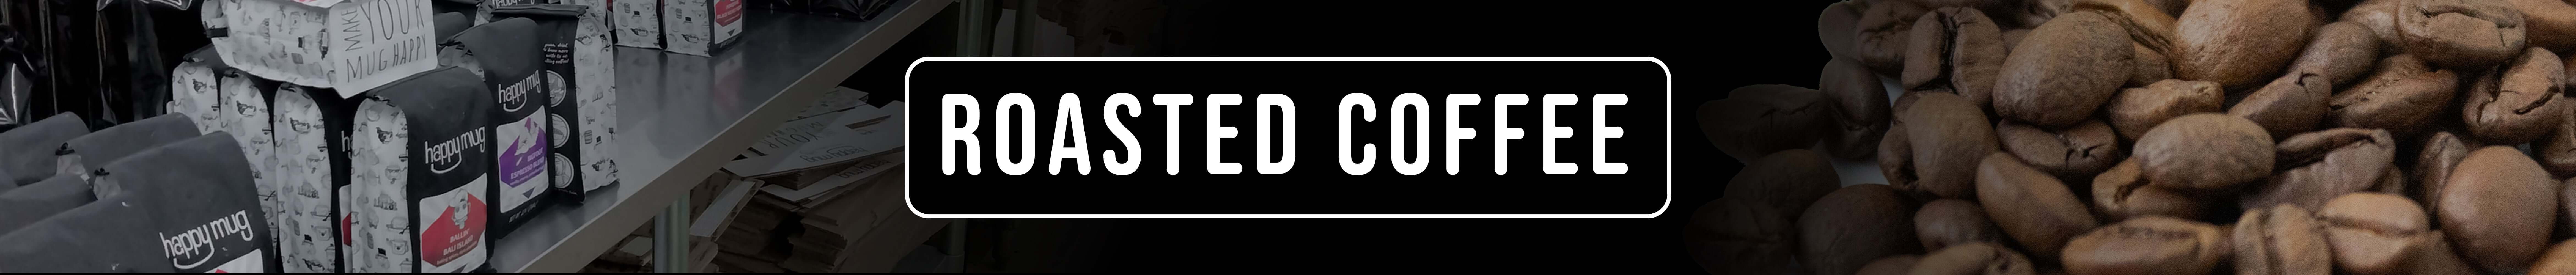 Roasted Coffee Banner